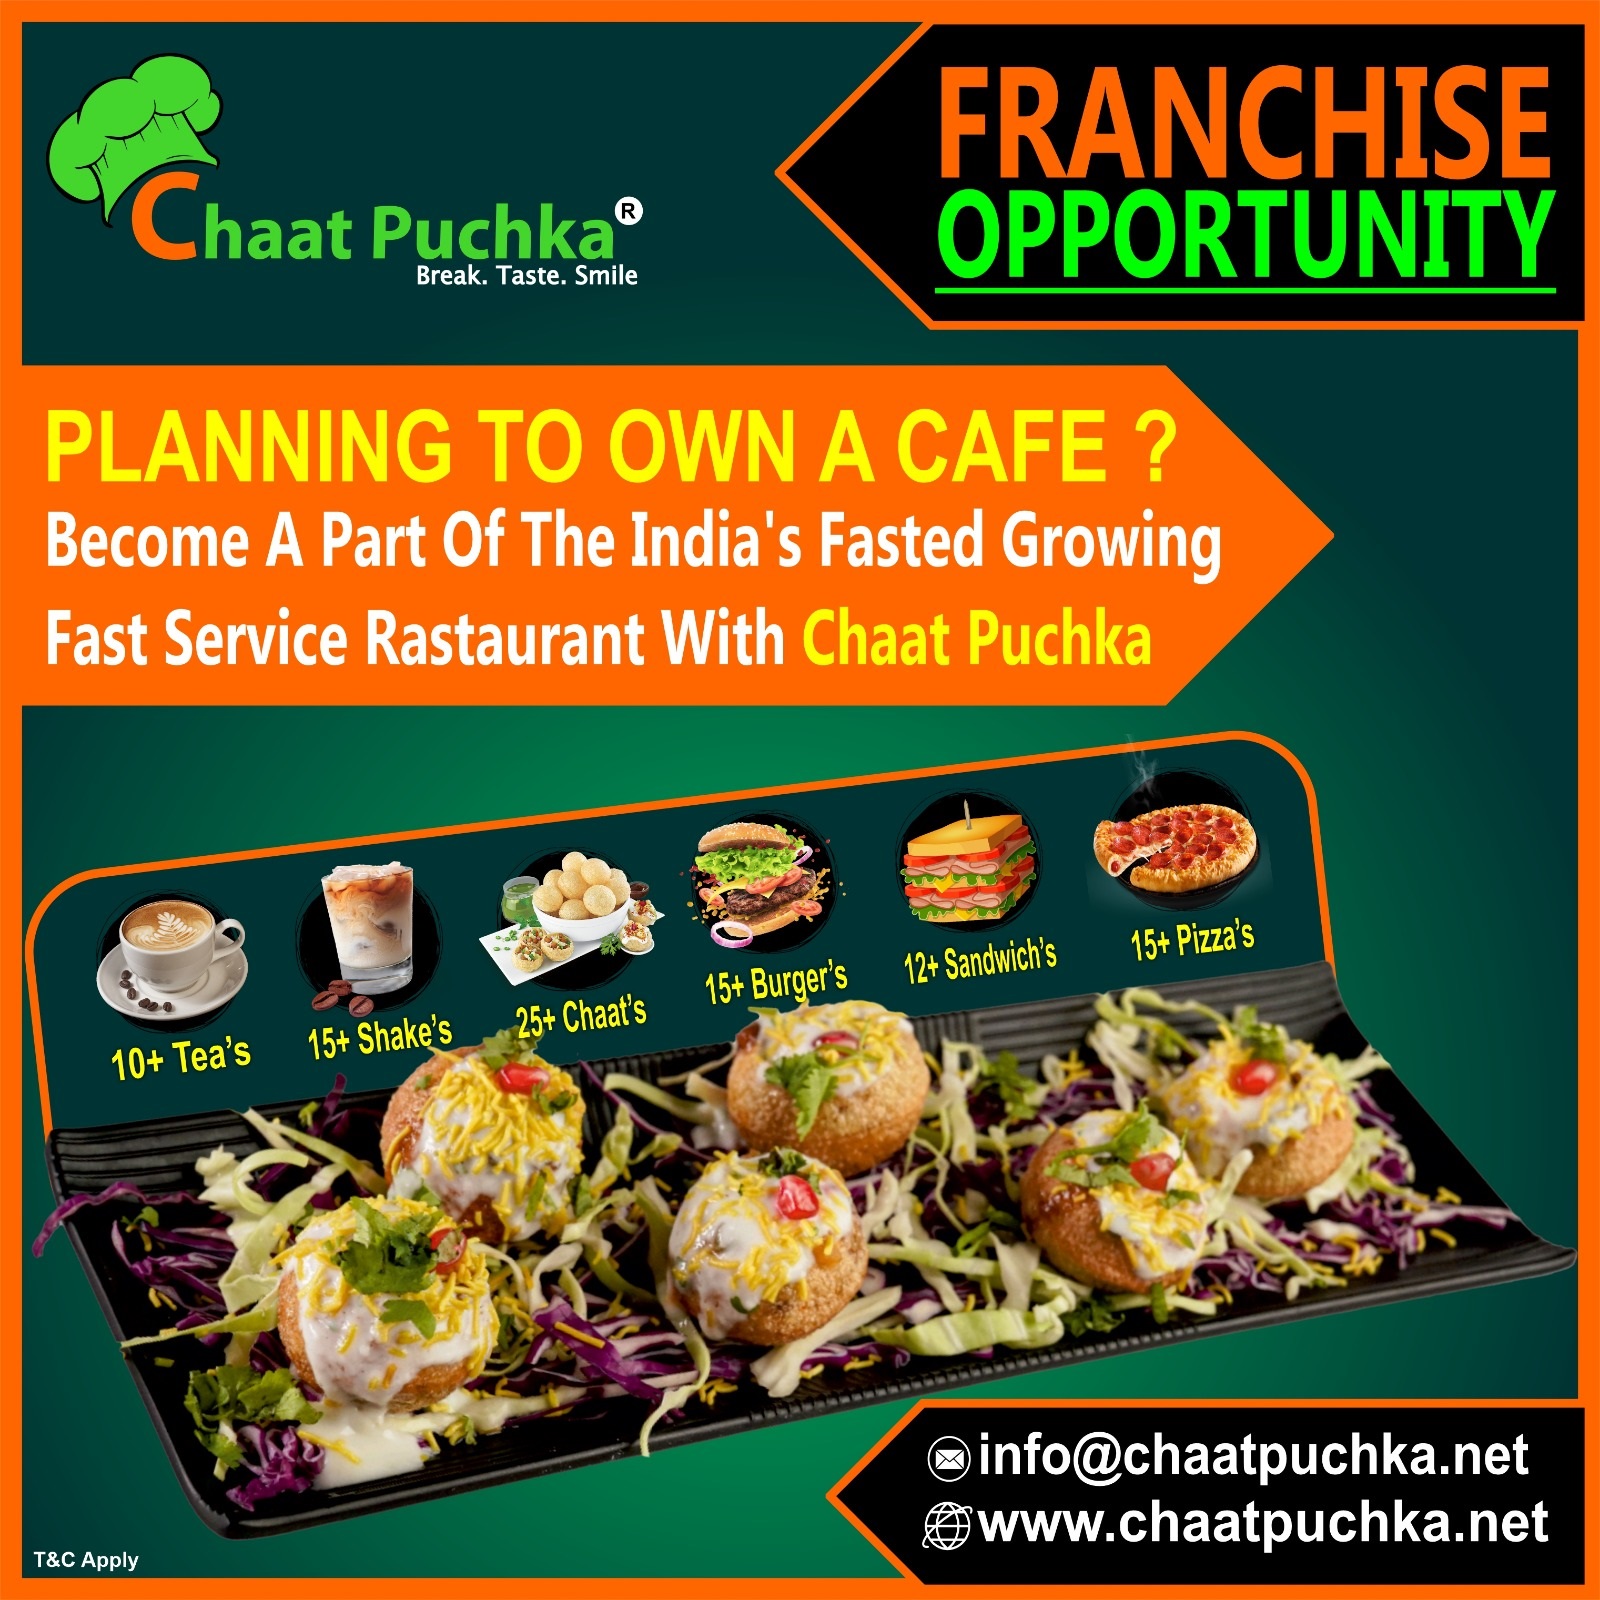 Food Franchise Under 10 Lakhs in India – Chaat Puchka